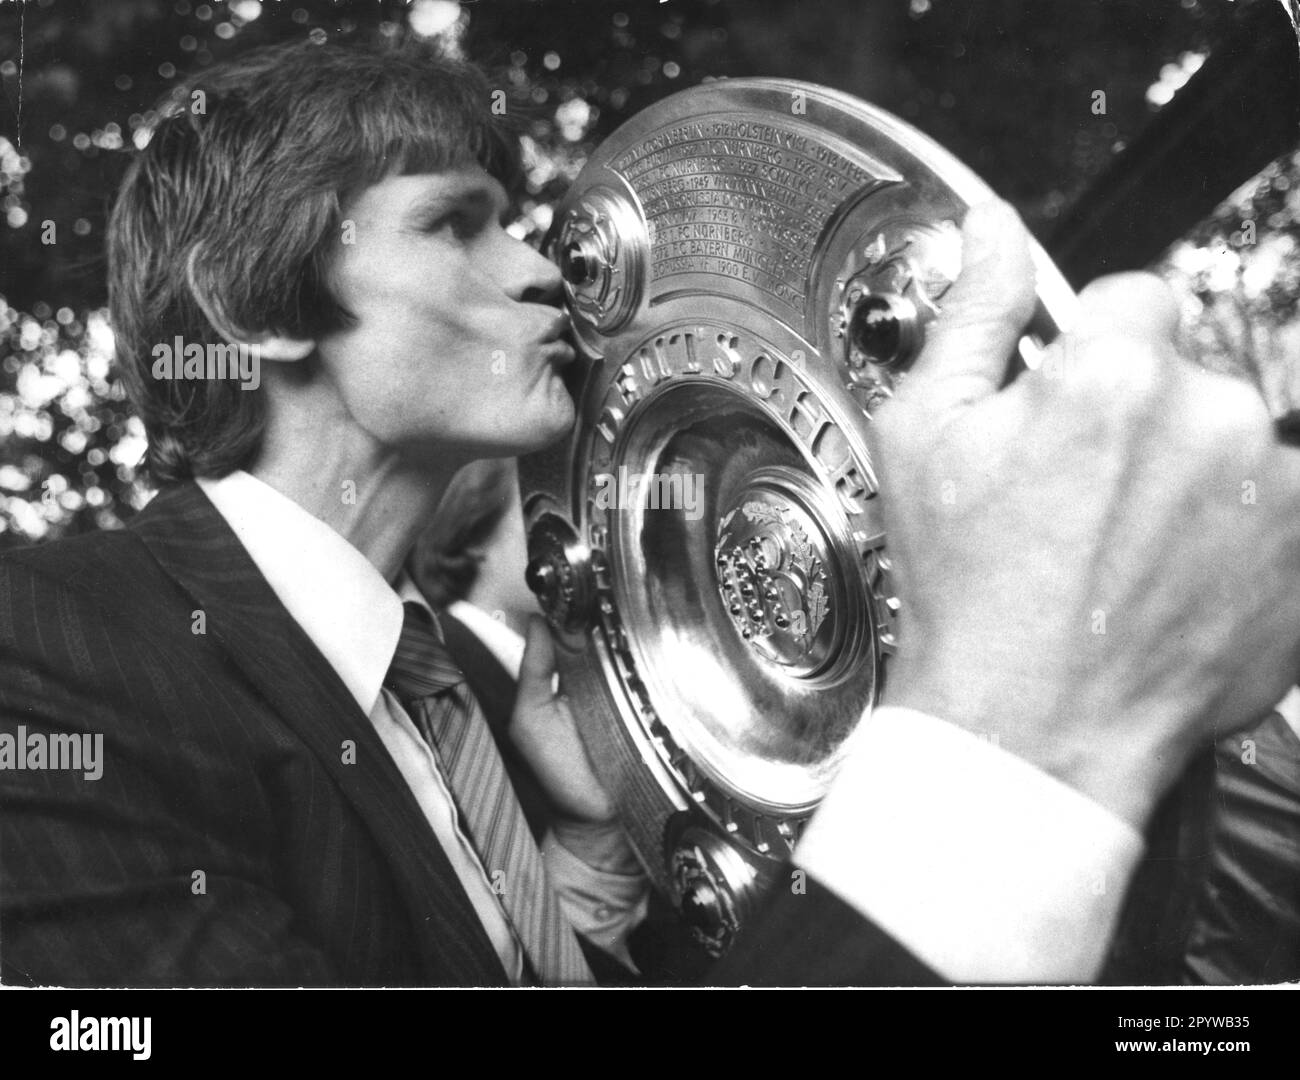 German Soccer League 1978/79 season. 1979 German soccer champion Hamburger SV. Peter Nogly kisses the championship trophy. For journalistic use only! Only for editorial use! [automated translation] Stock Photo